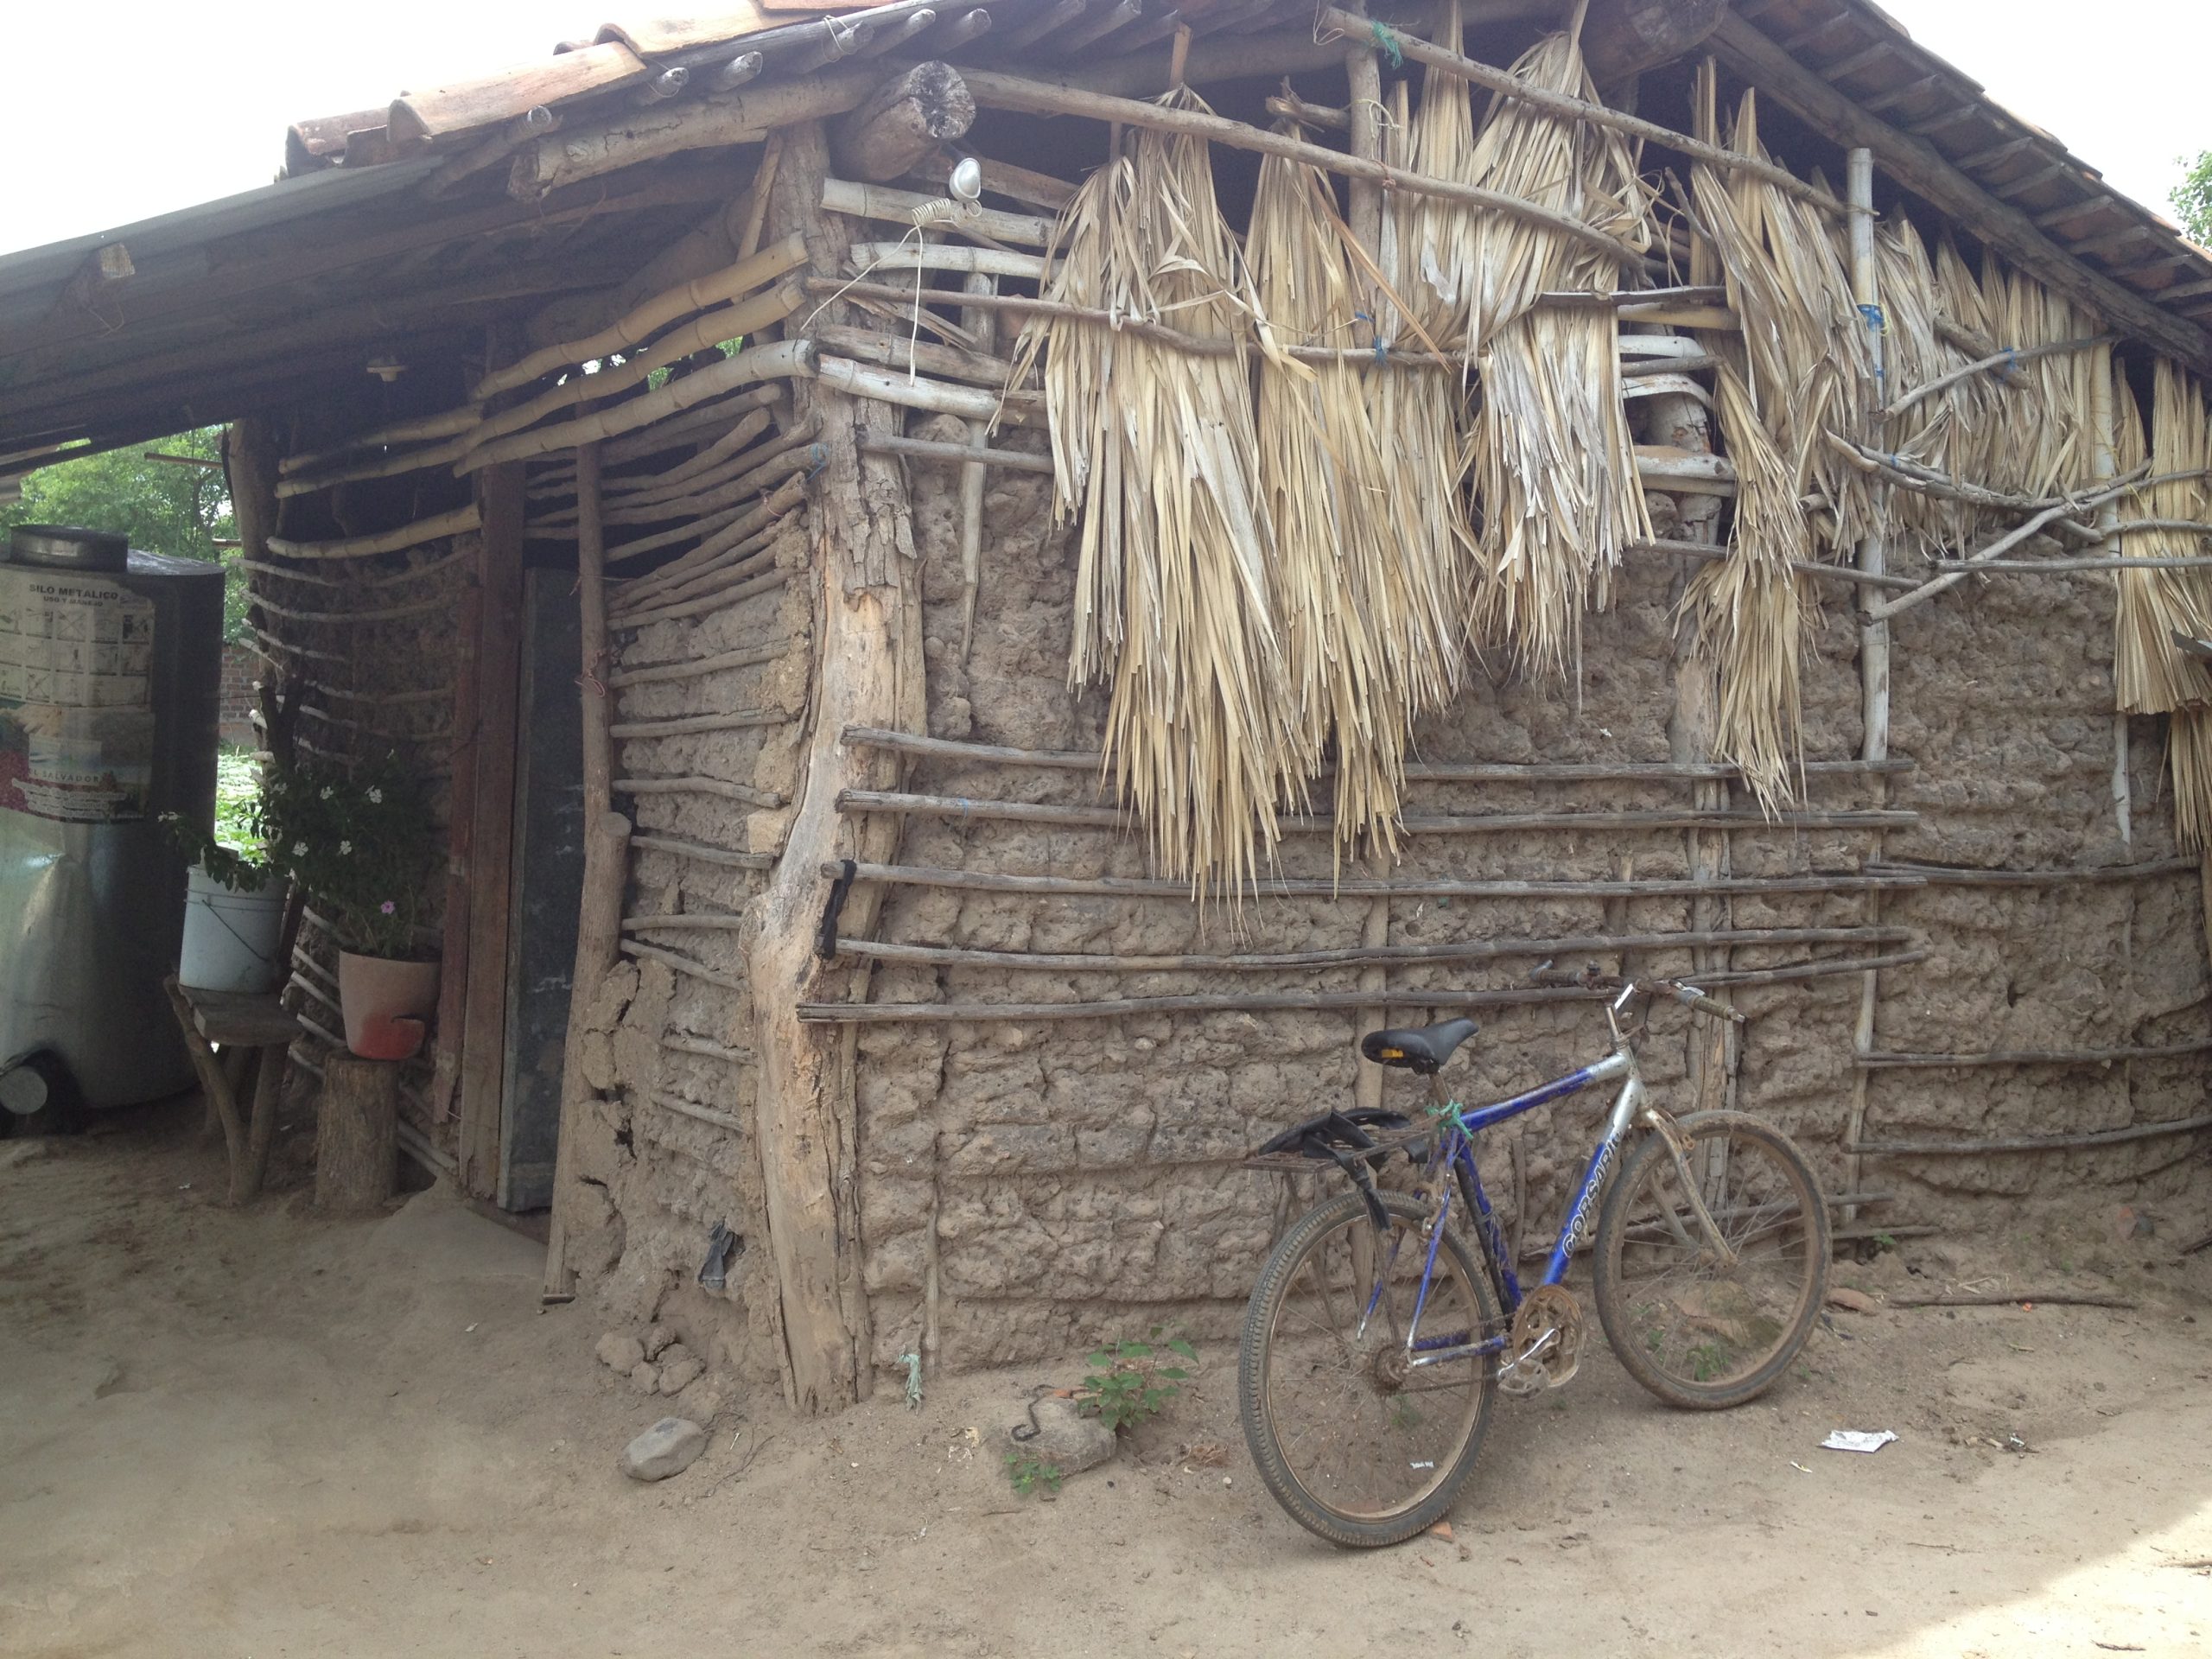 A Typical Home for the Rural Poor in El Salvador